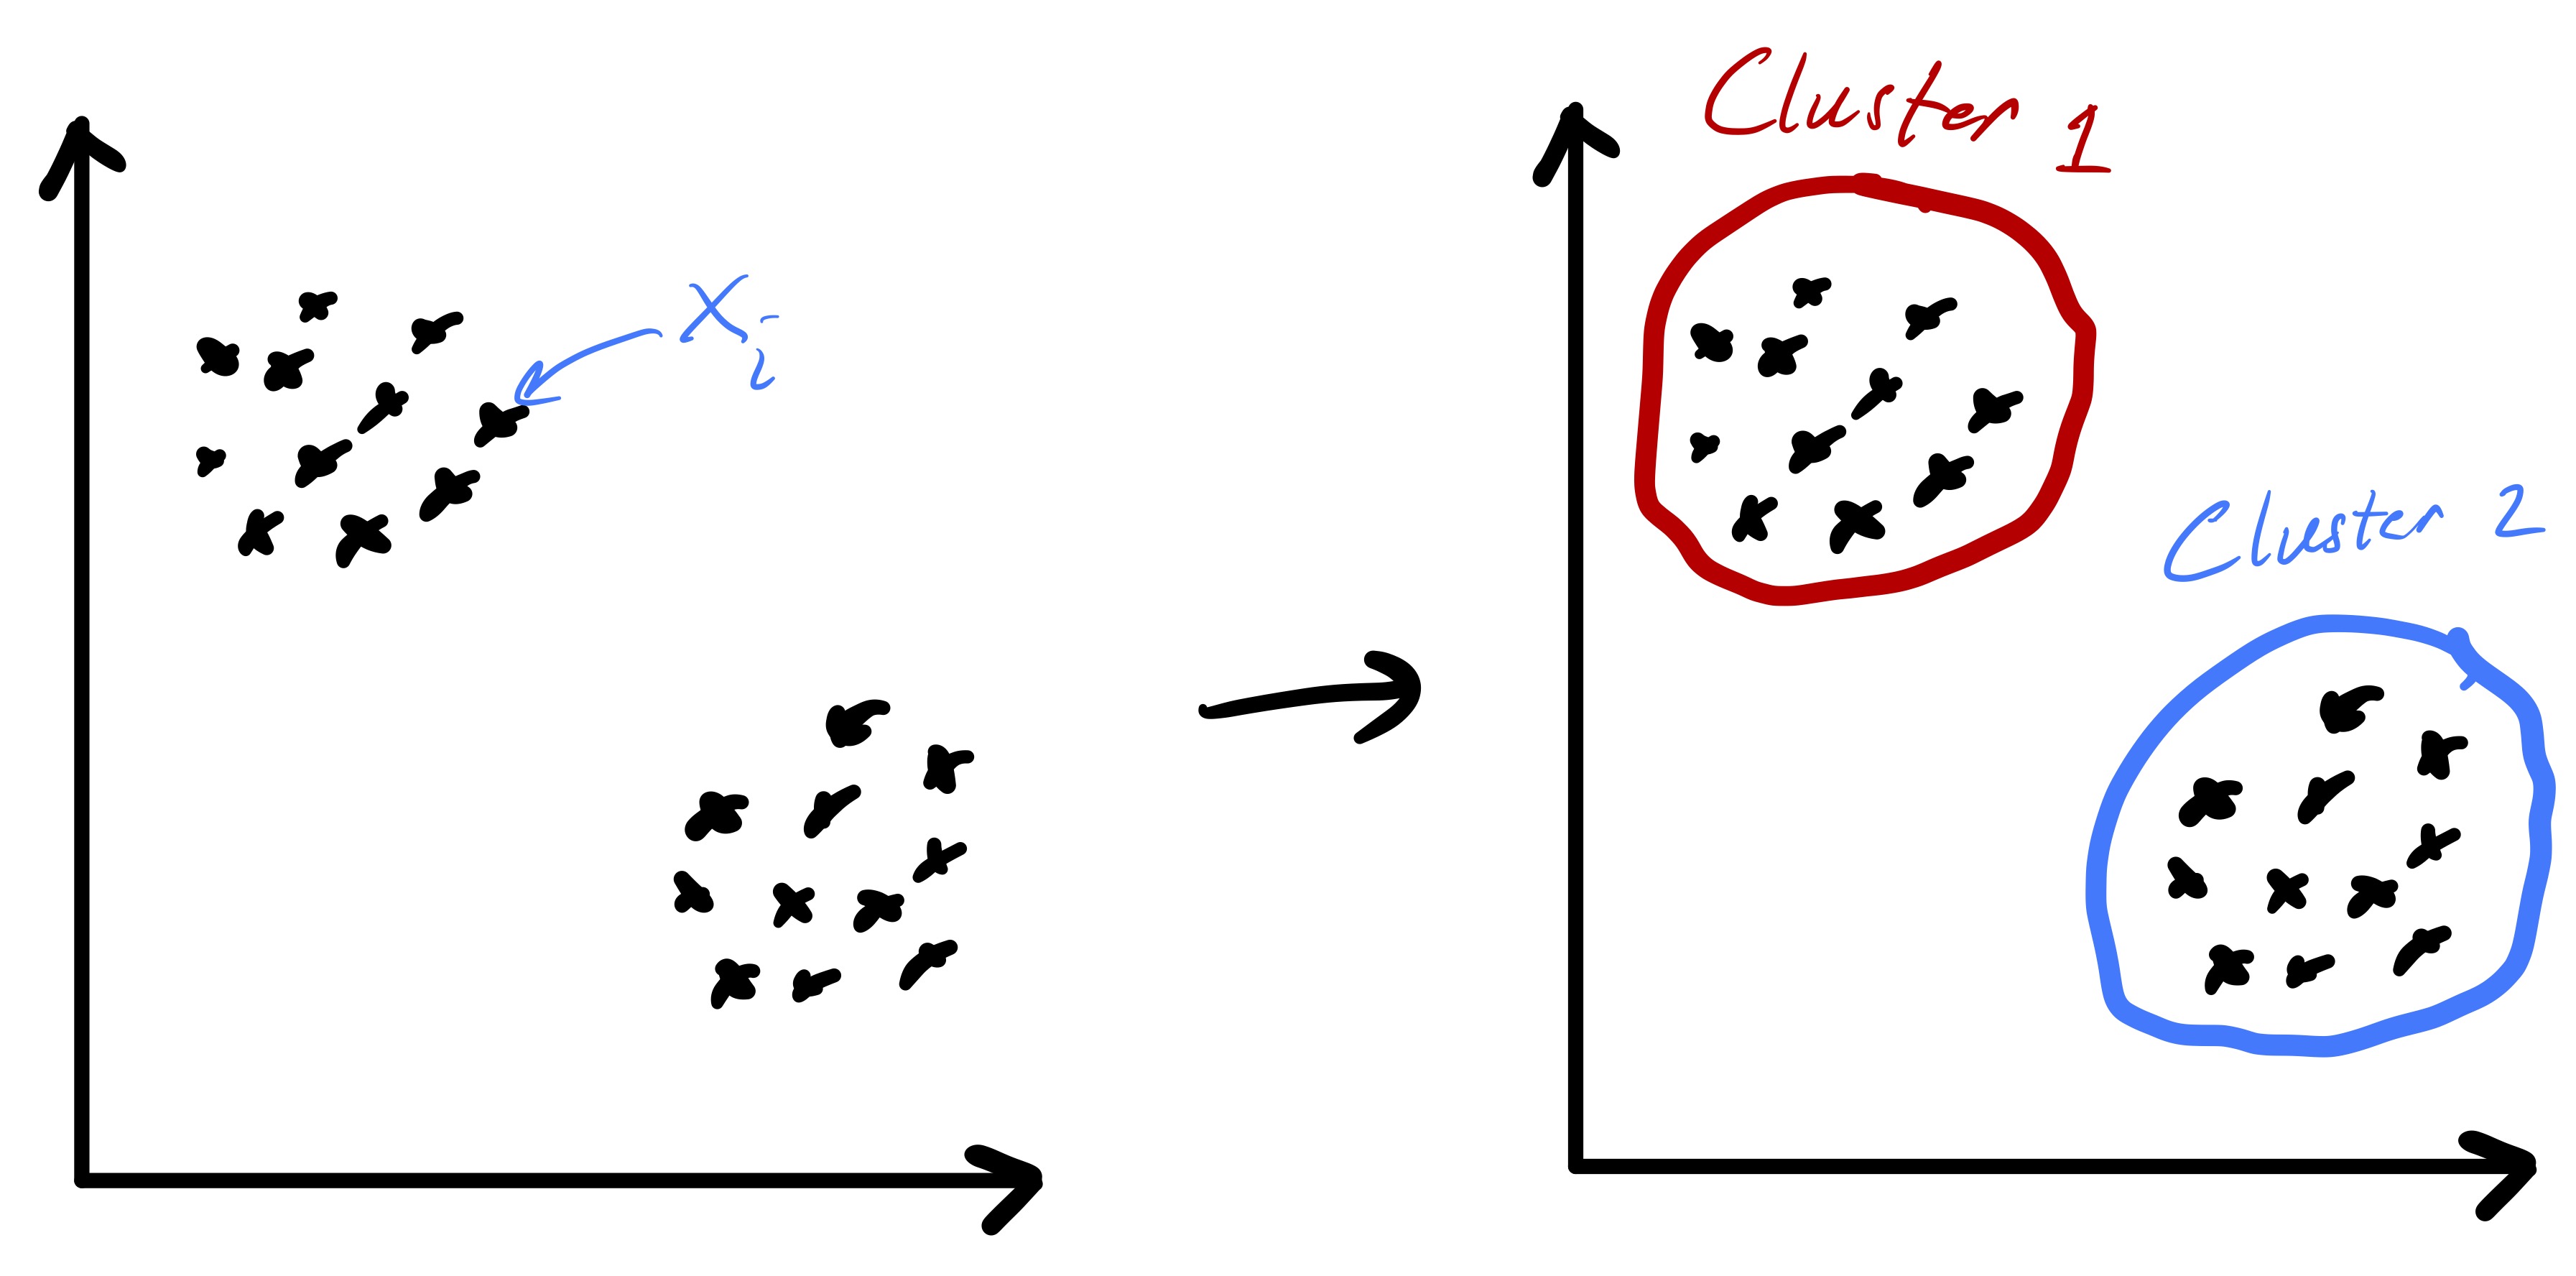 Figure 1: Clustering data into two clearly defined clusters based on euclidean distance.